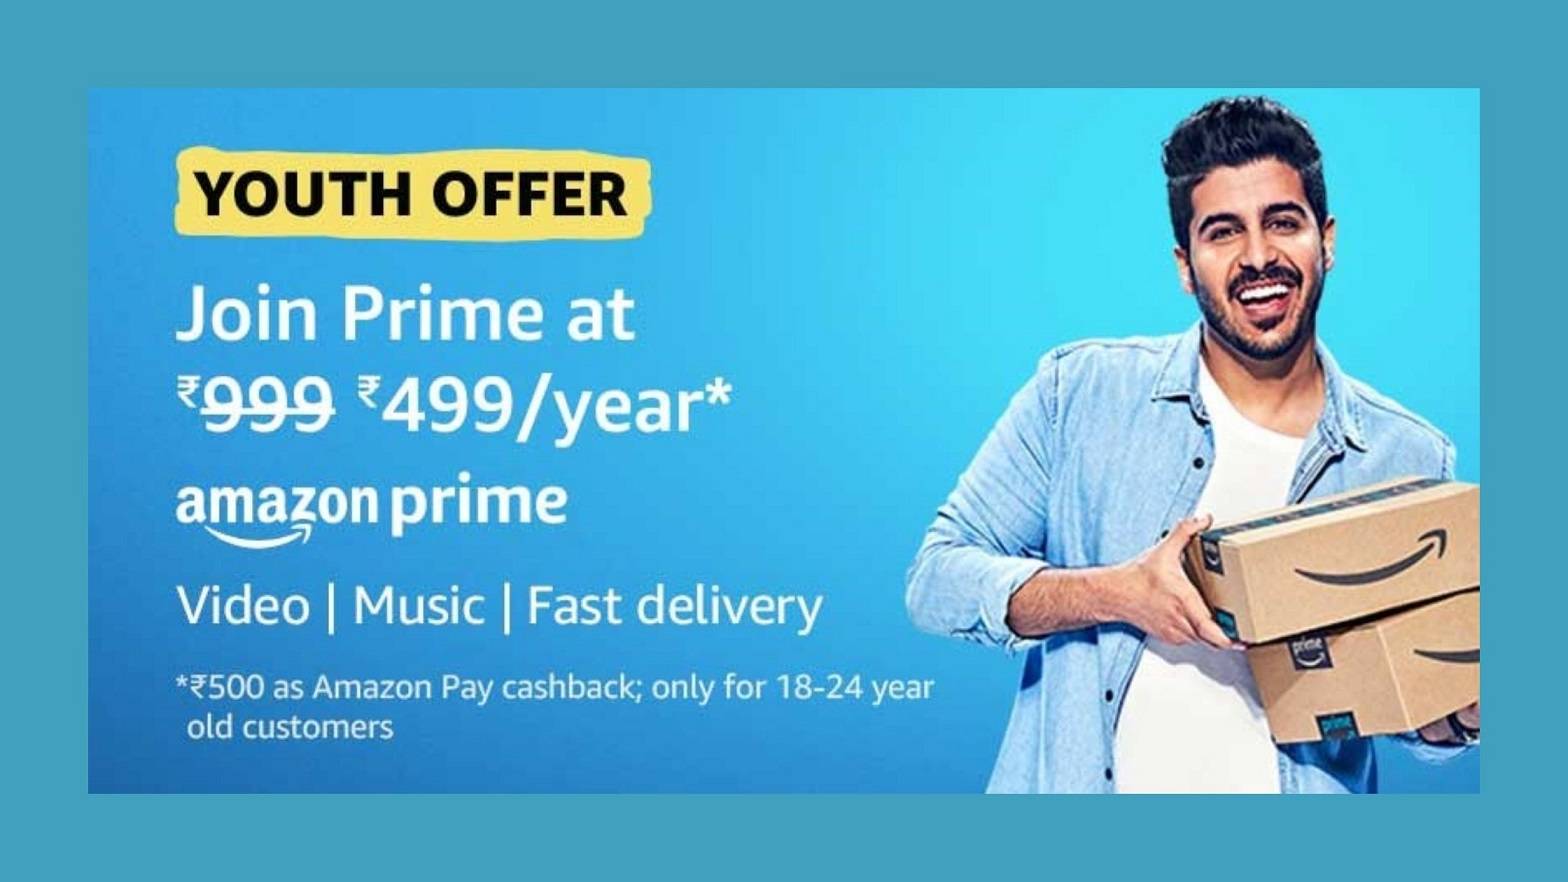 Amazon Youth Offer How to avail Prime Membership at lowest price